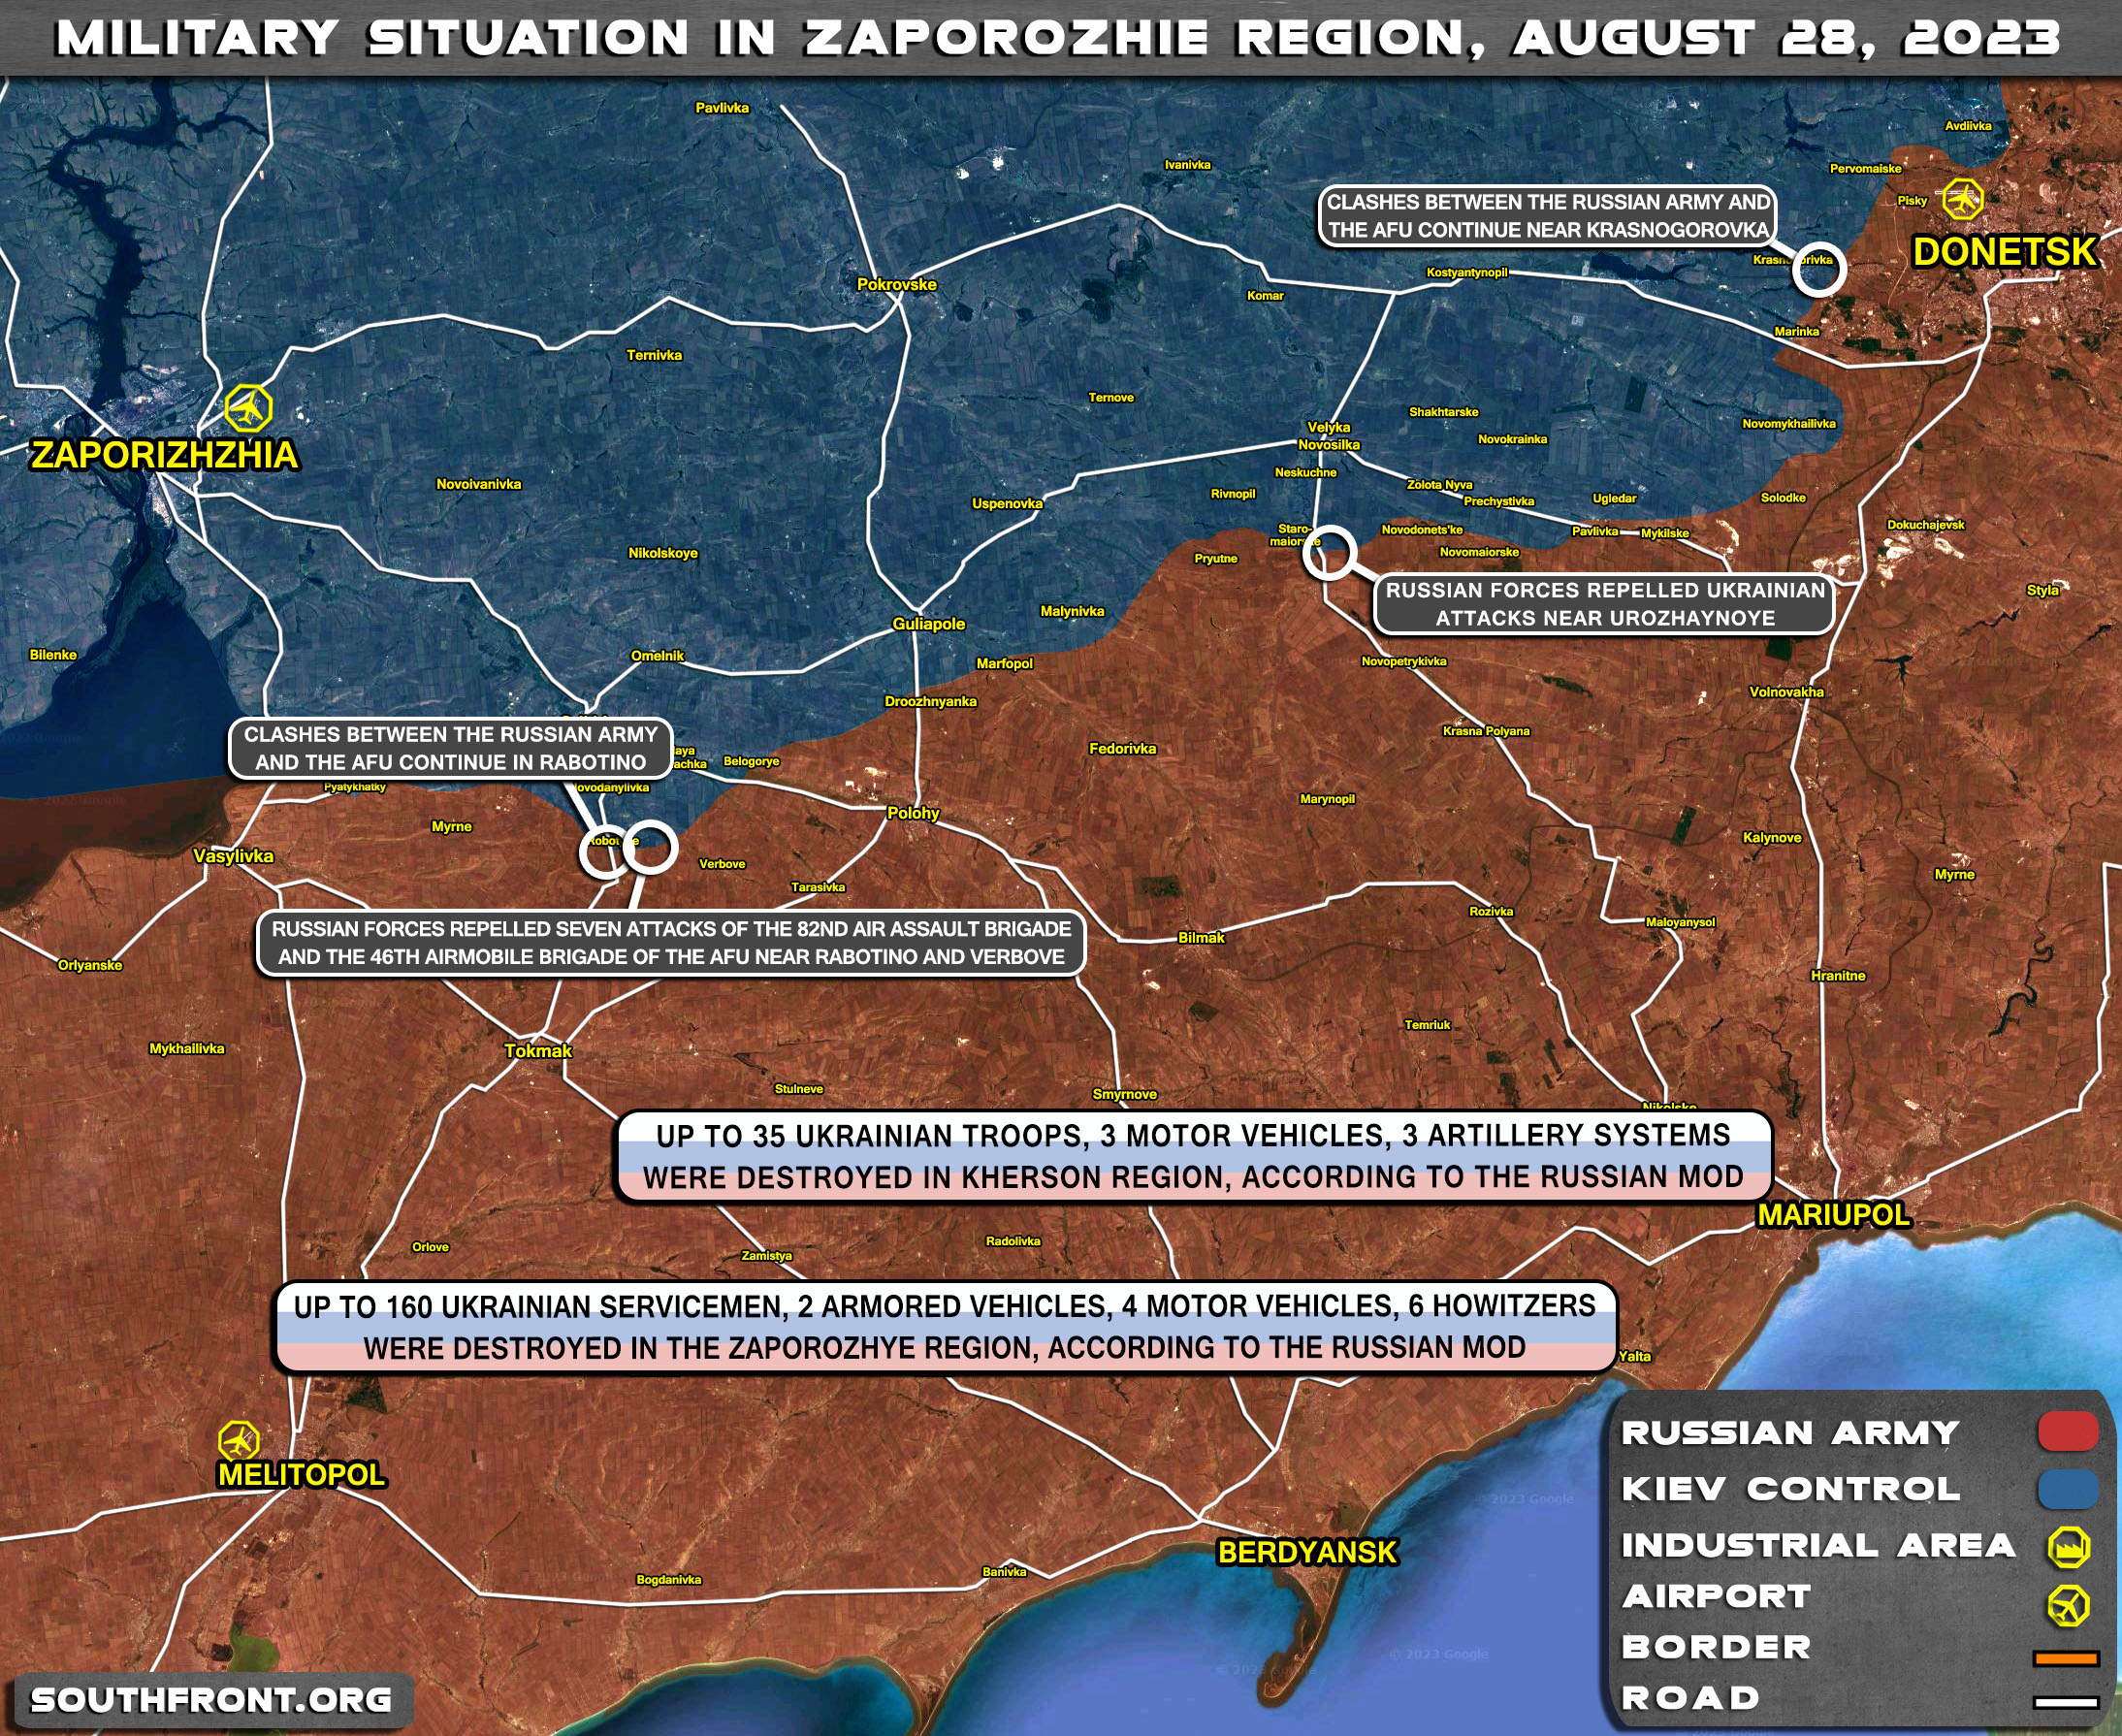 Military Overview On August 29, 2023: Ukrainian Forces Run Out Of Time